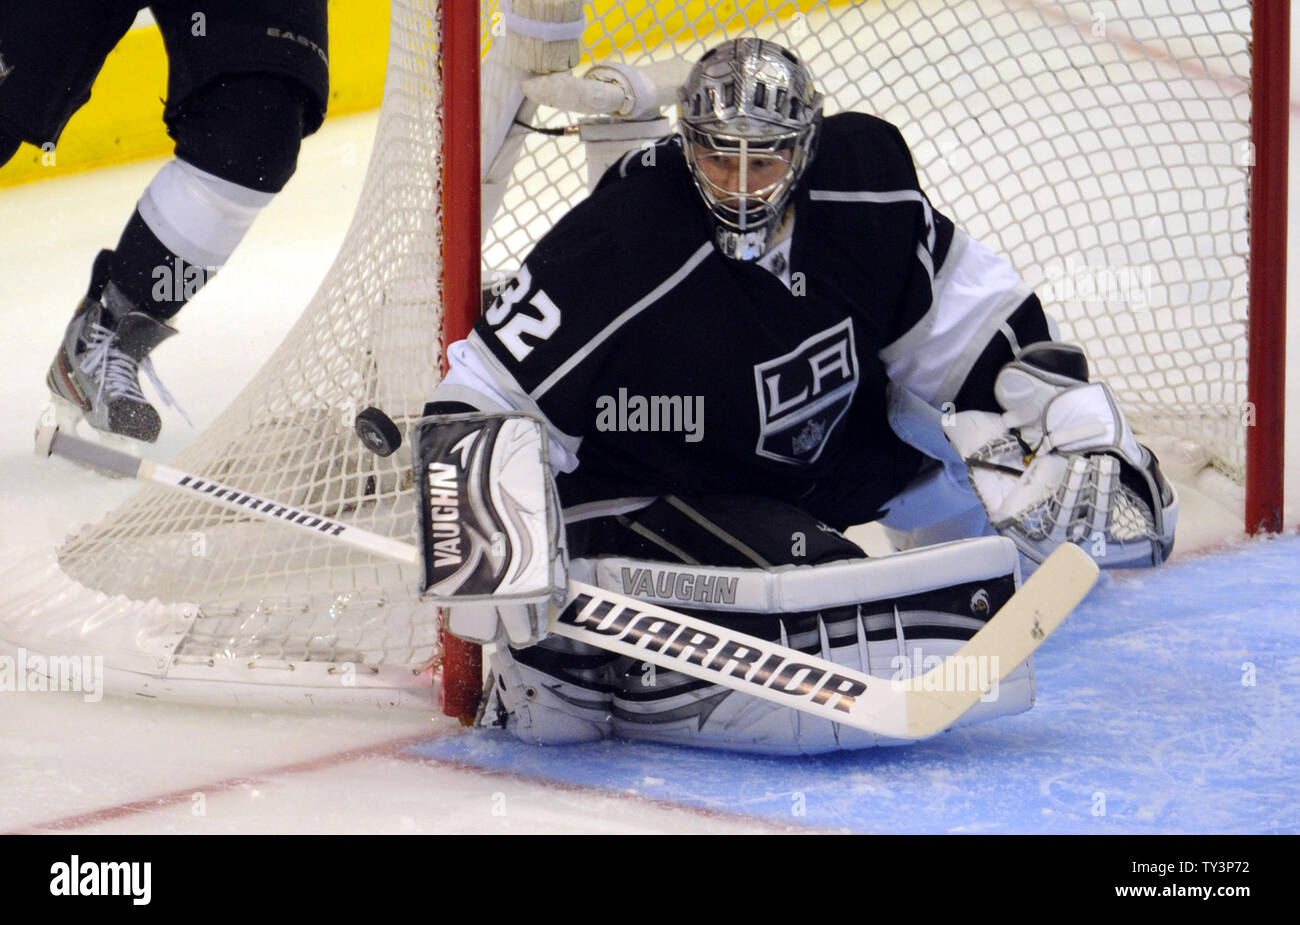 Marcel Dionne on Jonathan Quick and NHL goaltending